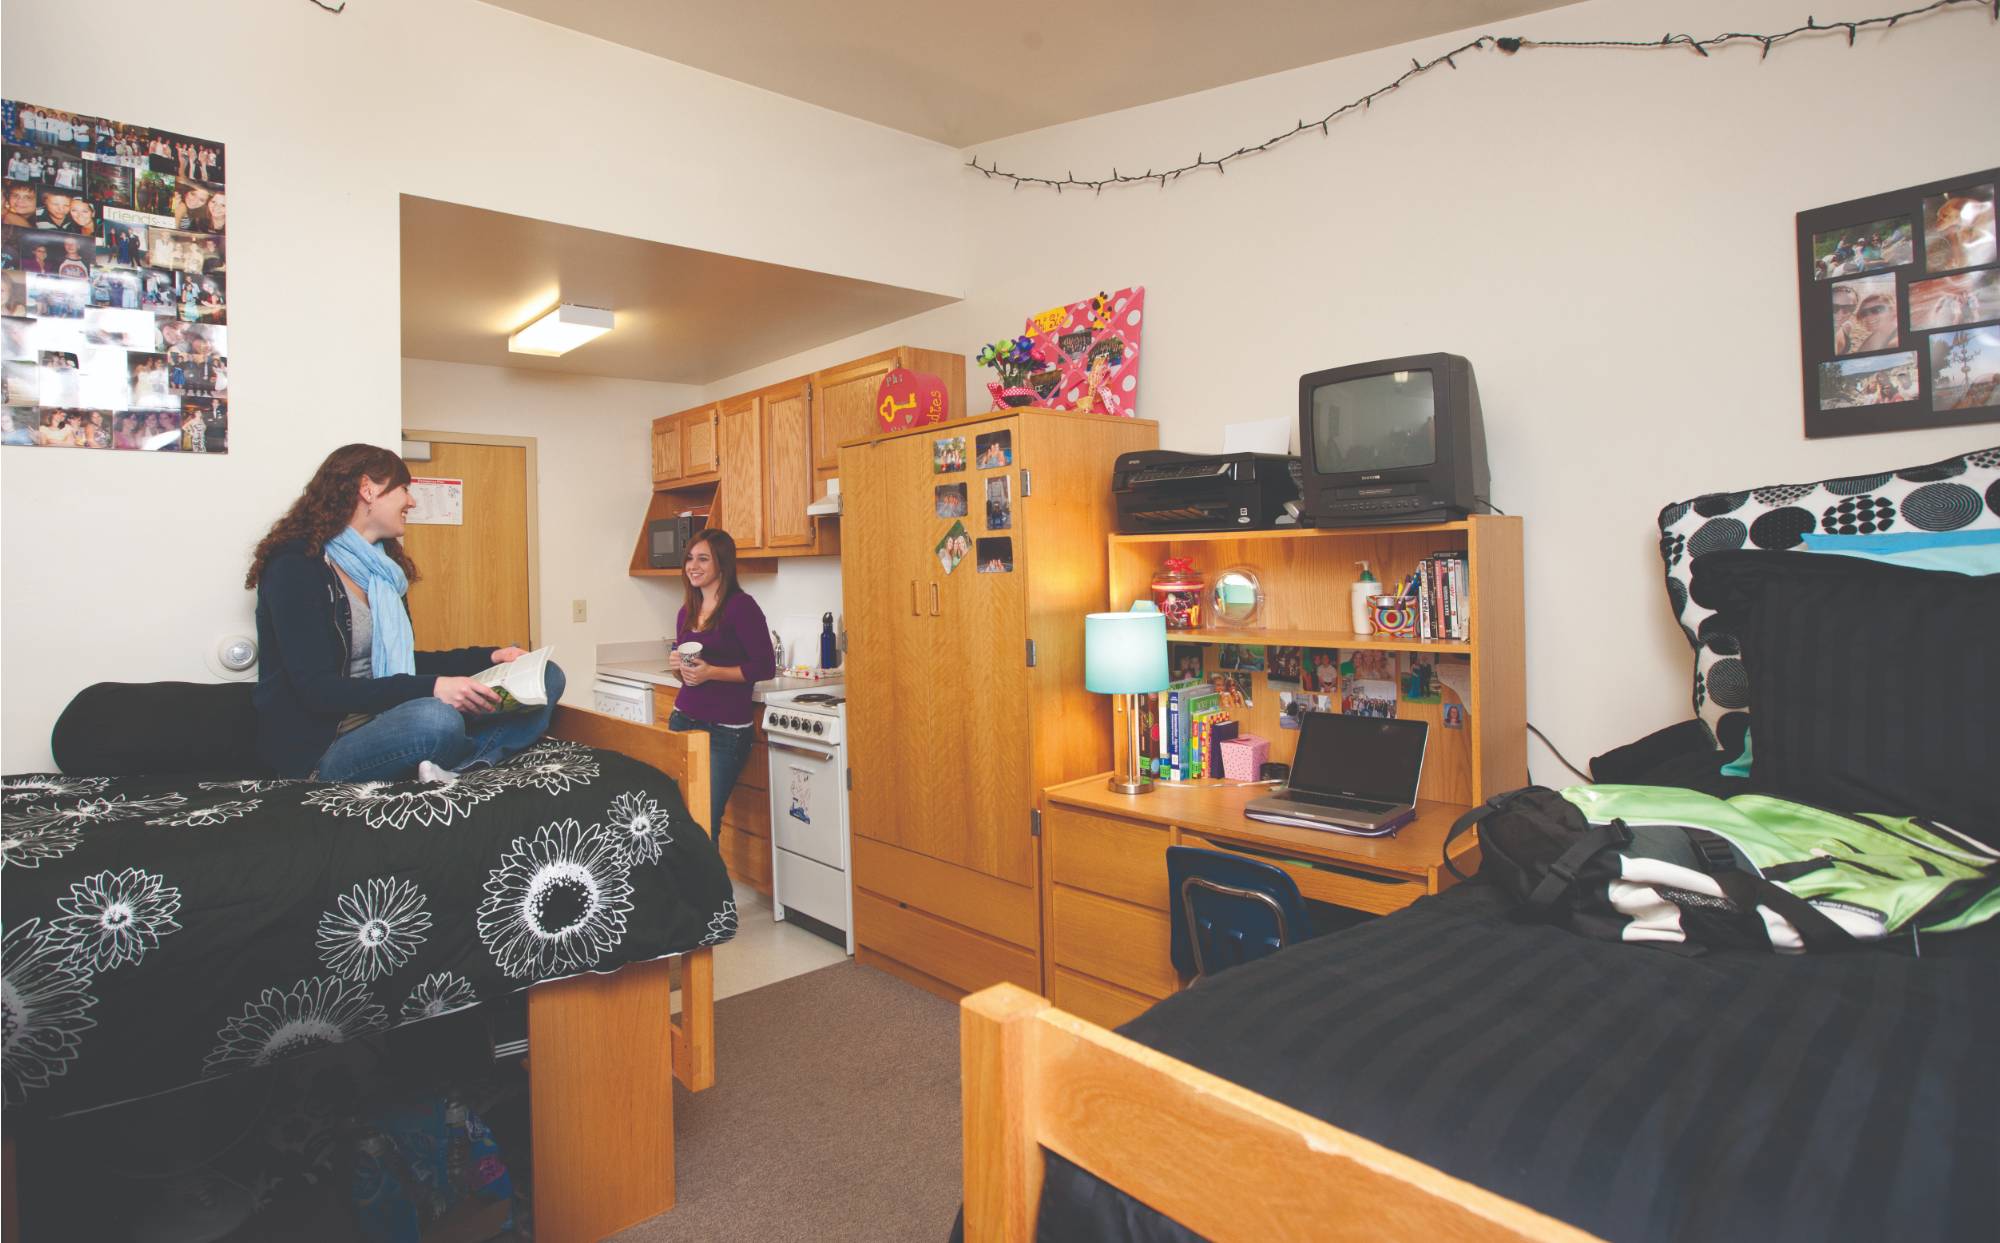 Students in a 1 bedroom apartment style room